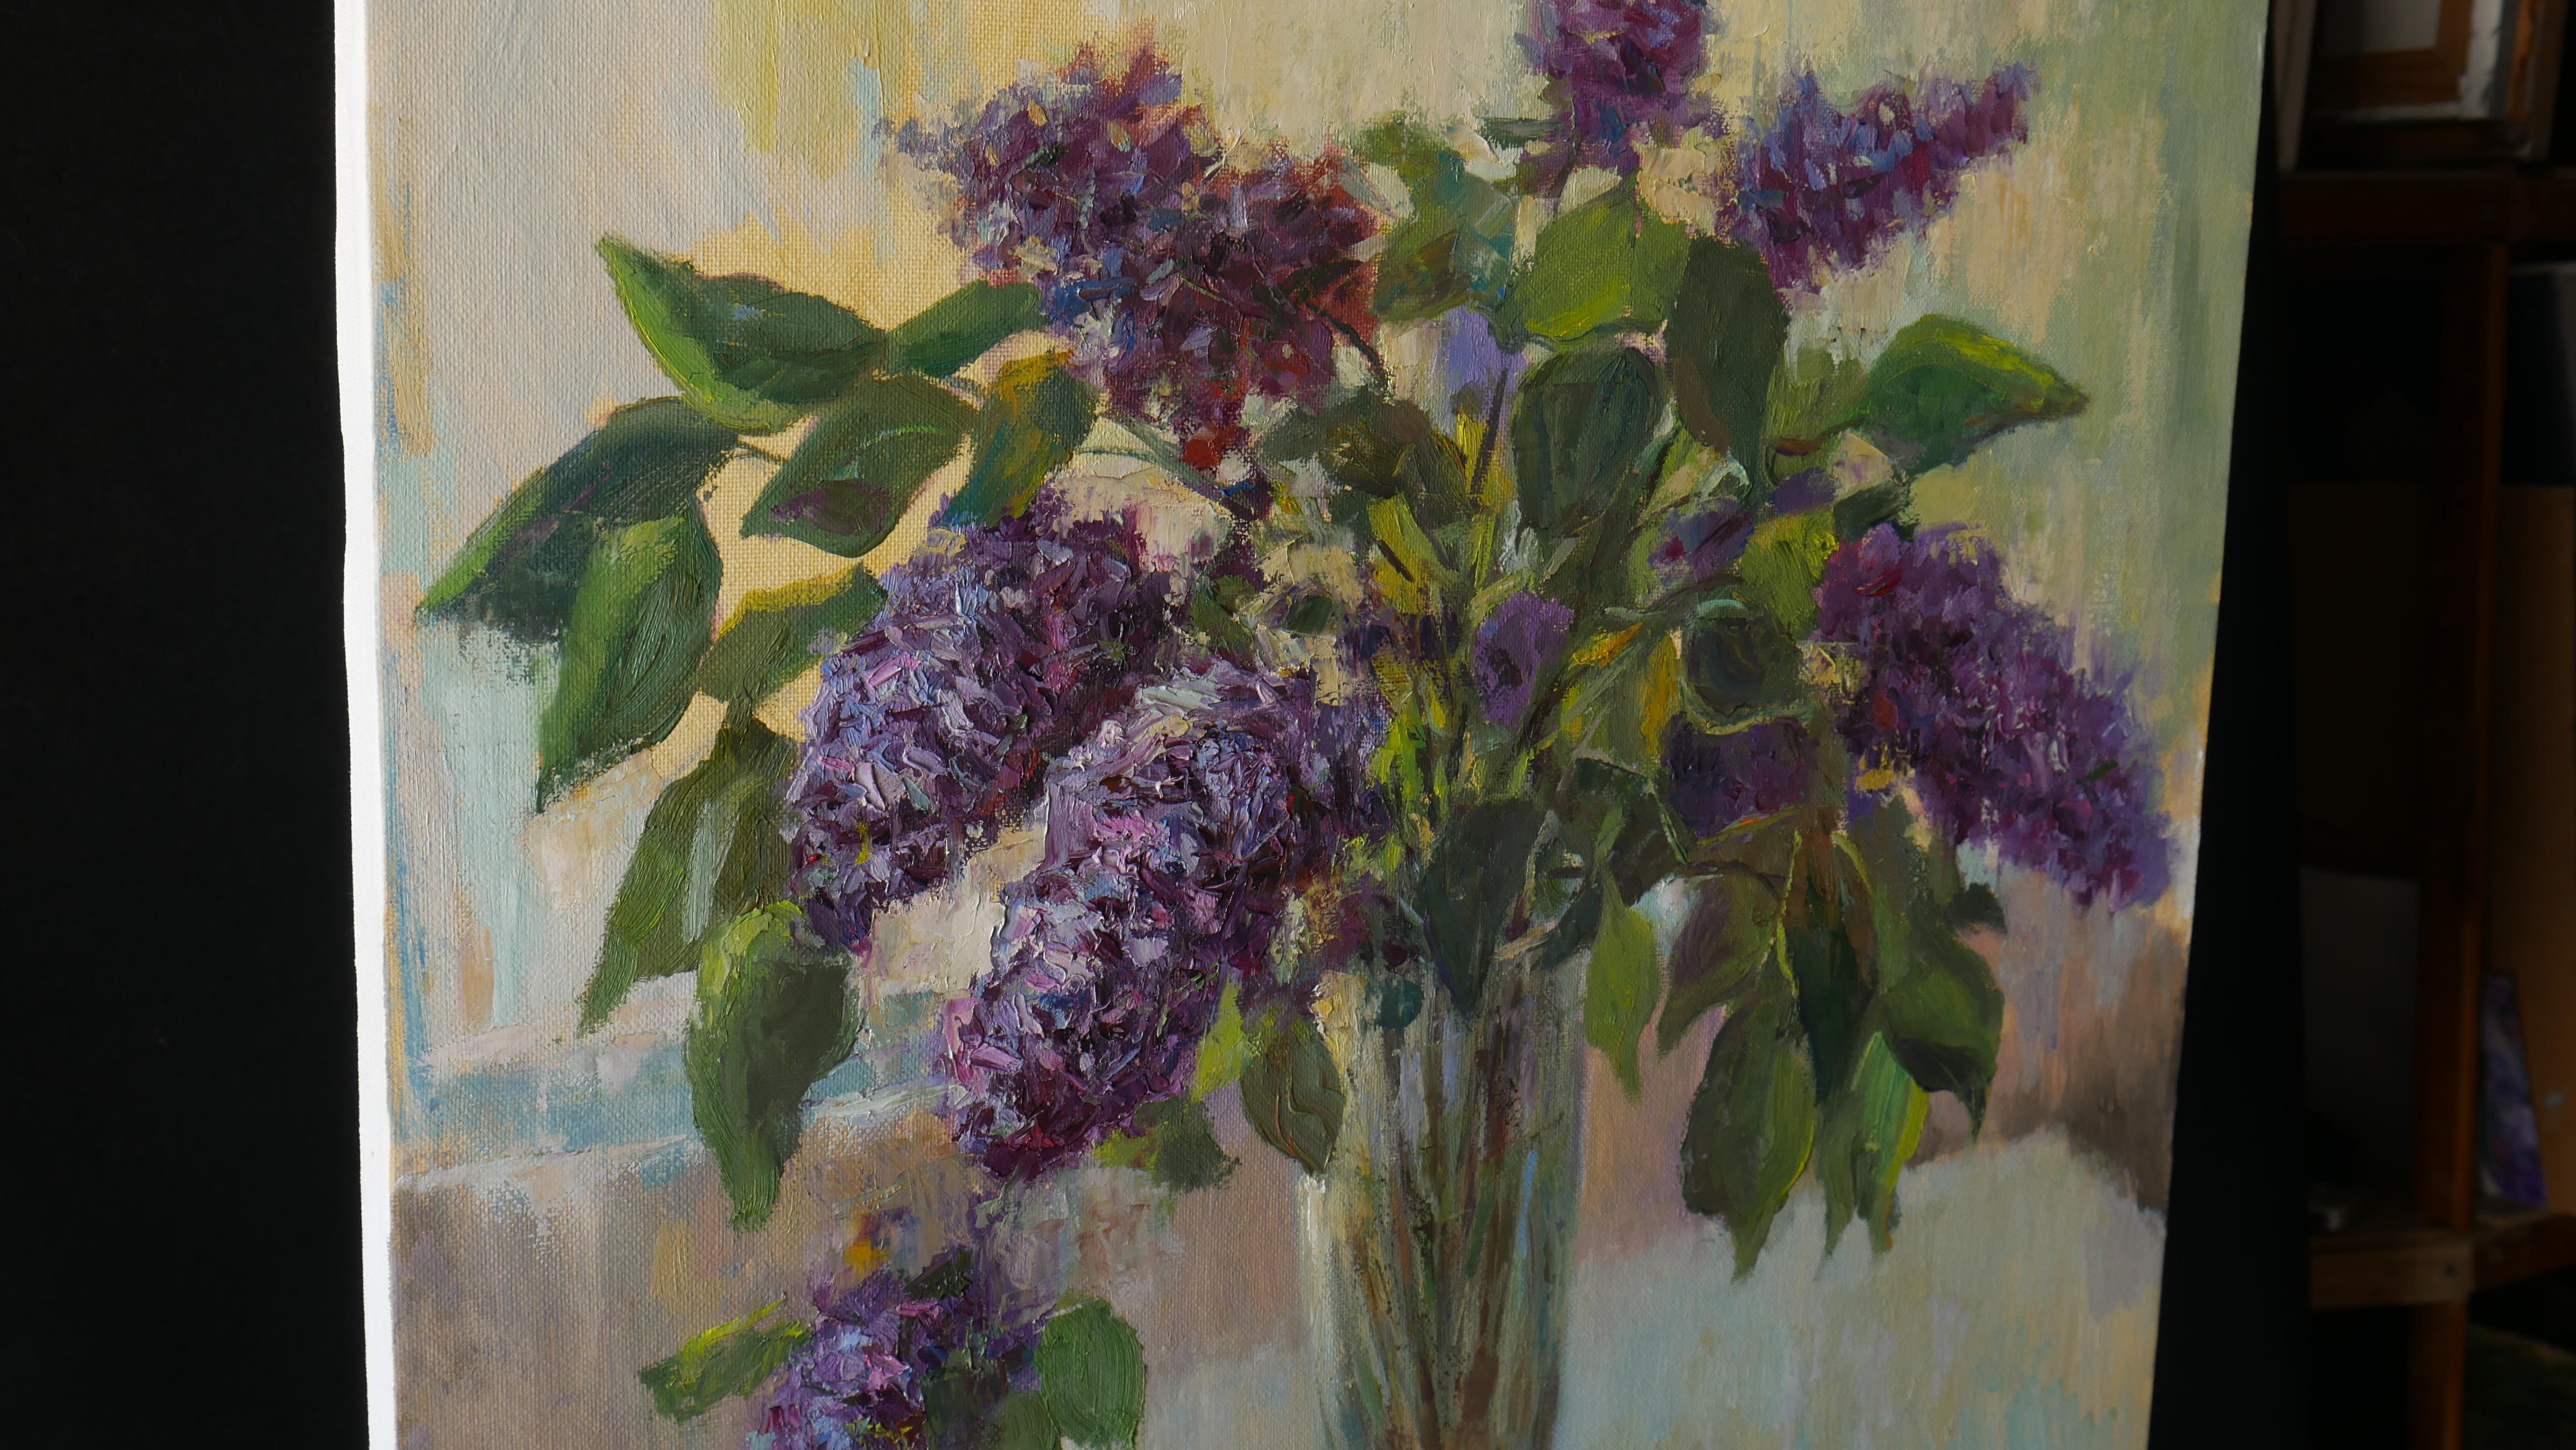 The most beautiful decoration of the May garden is the lilac. A branch of blooming lilacs will always decorate any home. Nikolay loves lilacs for its delicate fragrant flowers that delight us every year.
The artwork is very cozy, perfect gift, looks